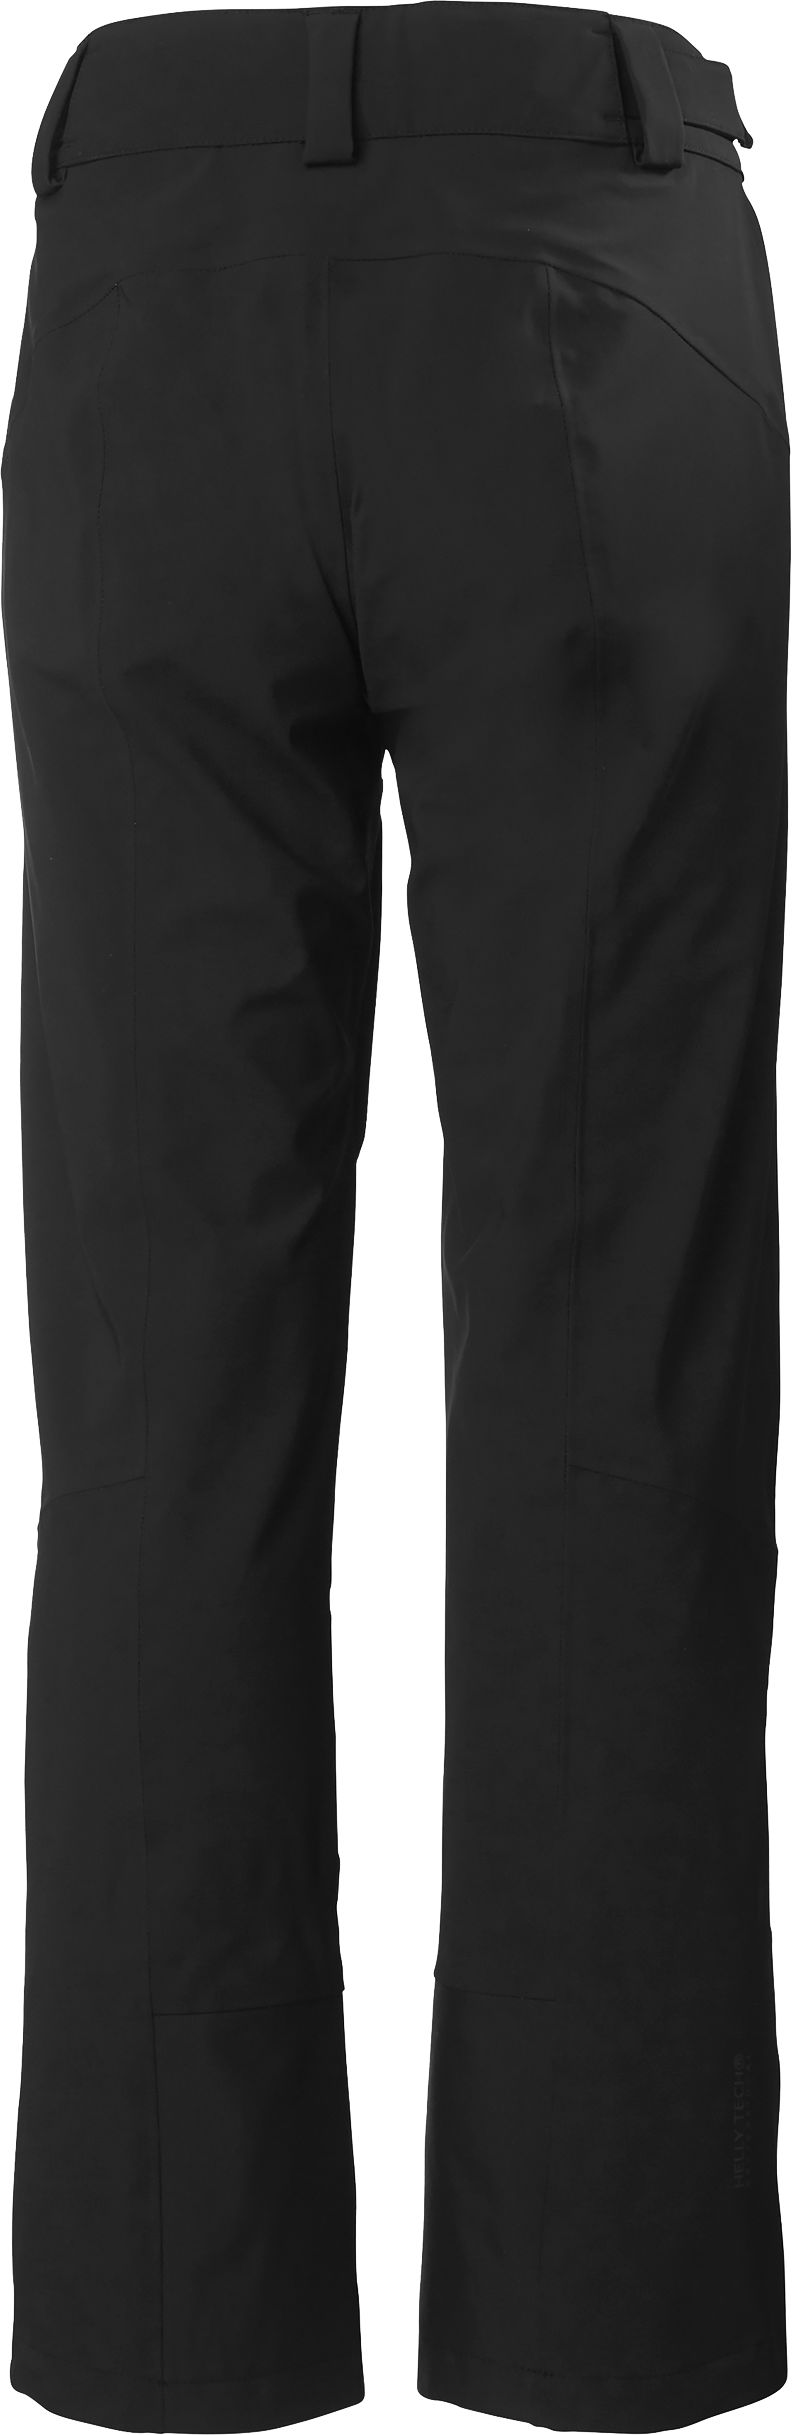 HELLY HANSEN, W MOTIONISTA 3L SHELL PANT